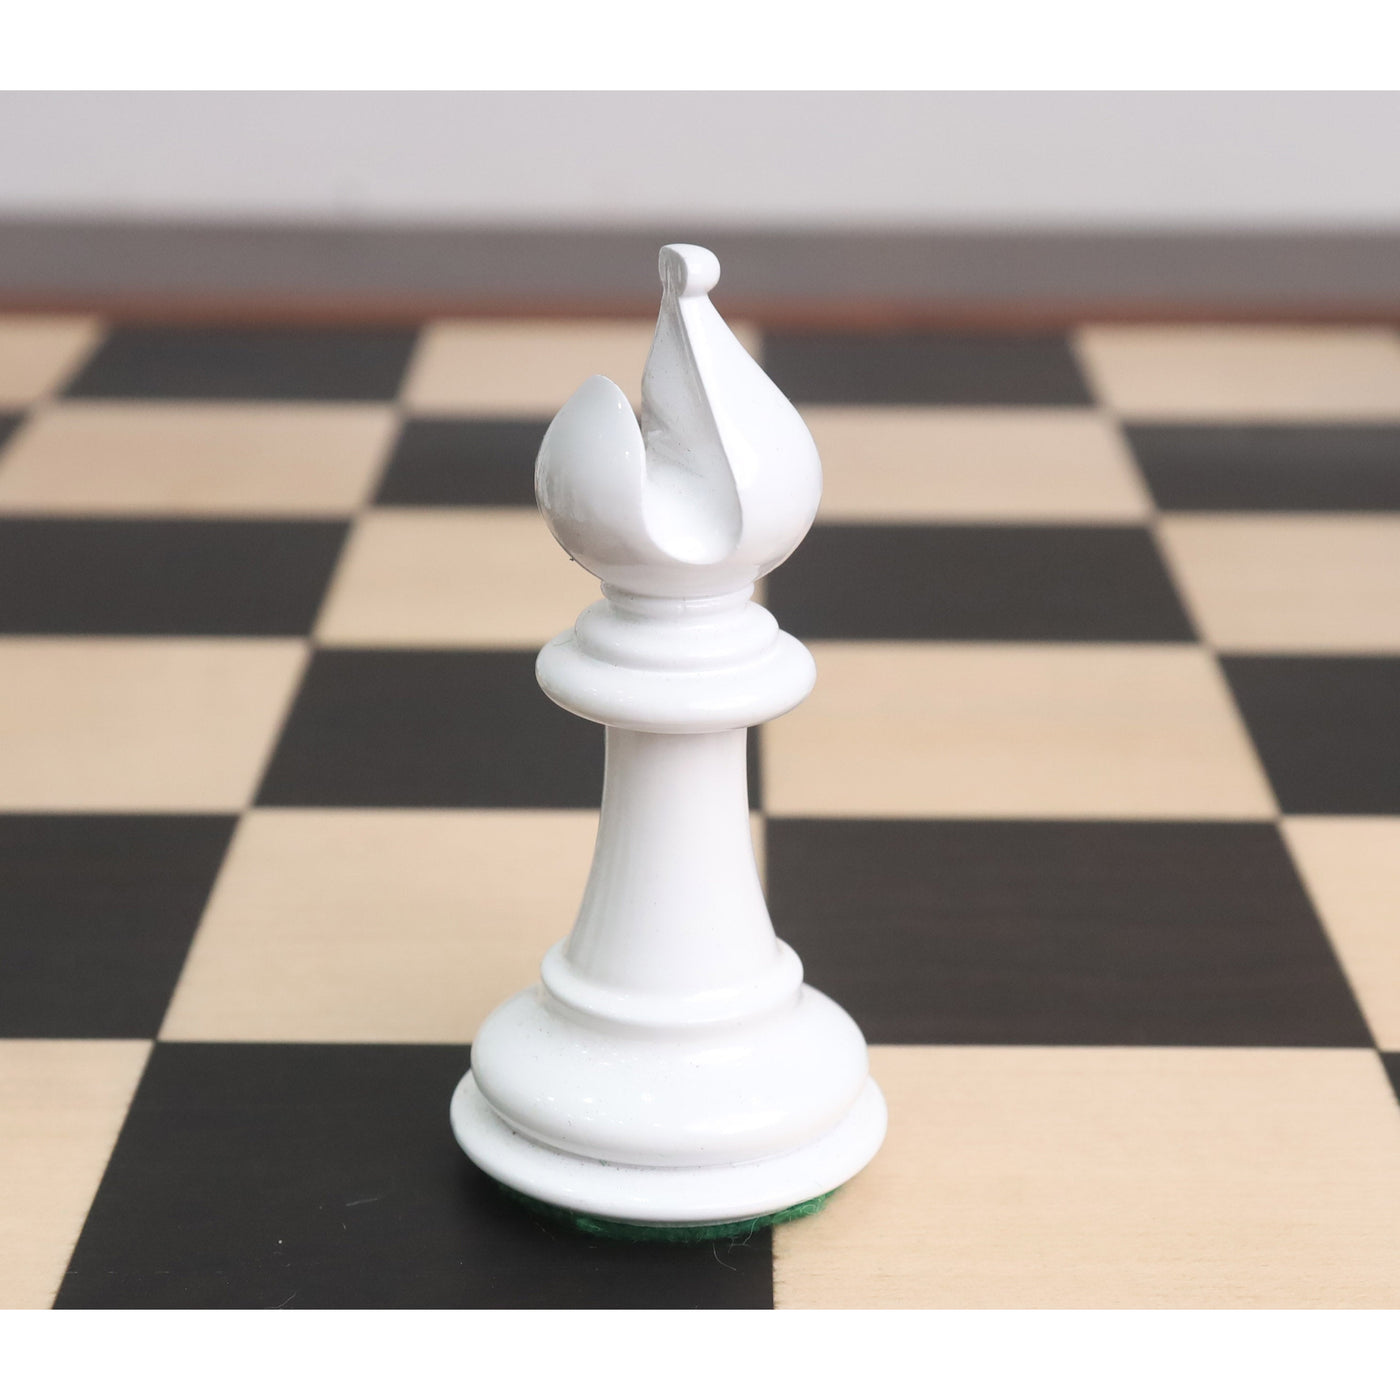 Slightly Imperfect 3.7" Emperor Staunton Chess Set - Chess Pieces Only - Lacquered White and Black Boxwood